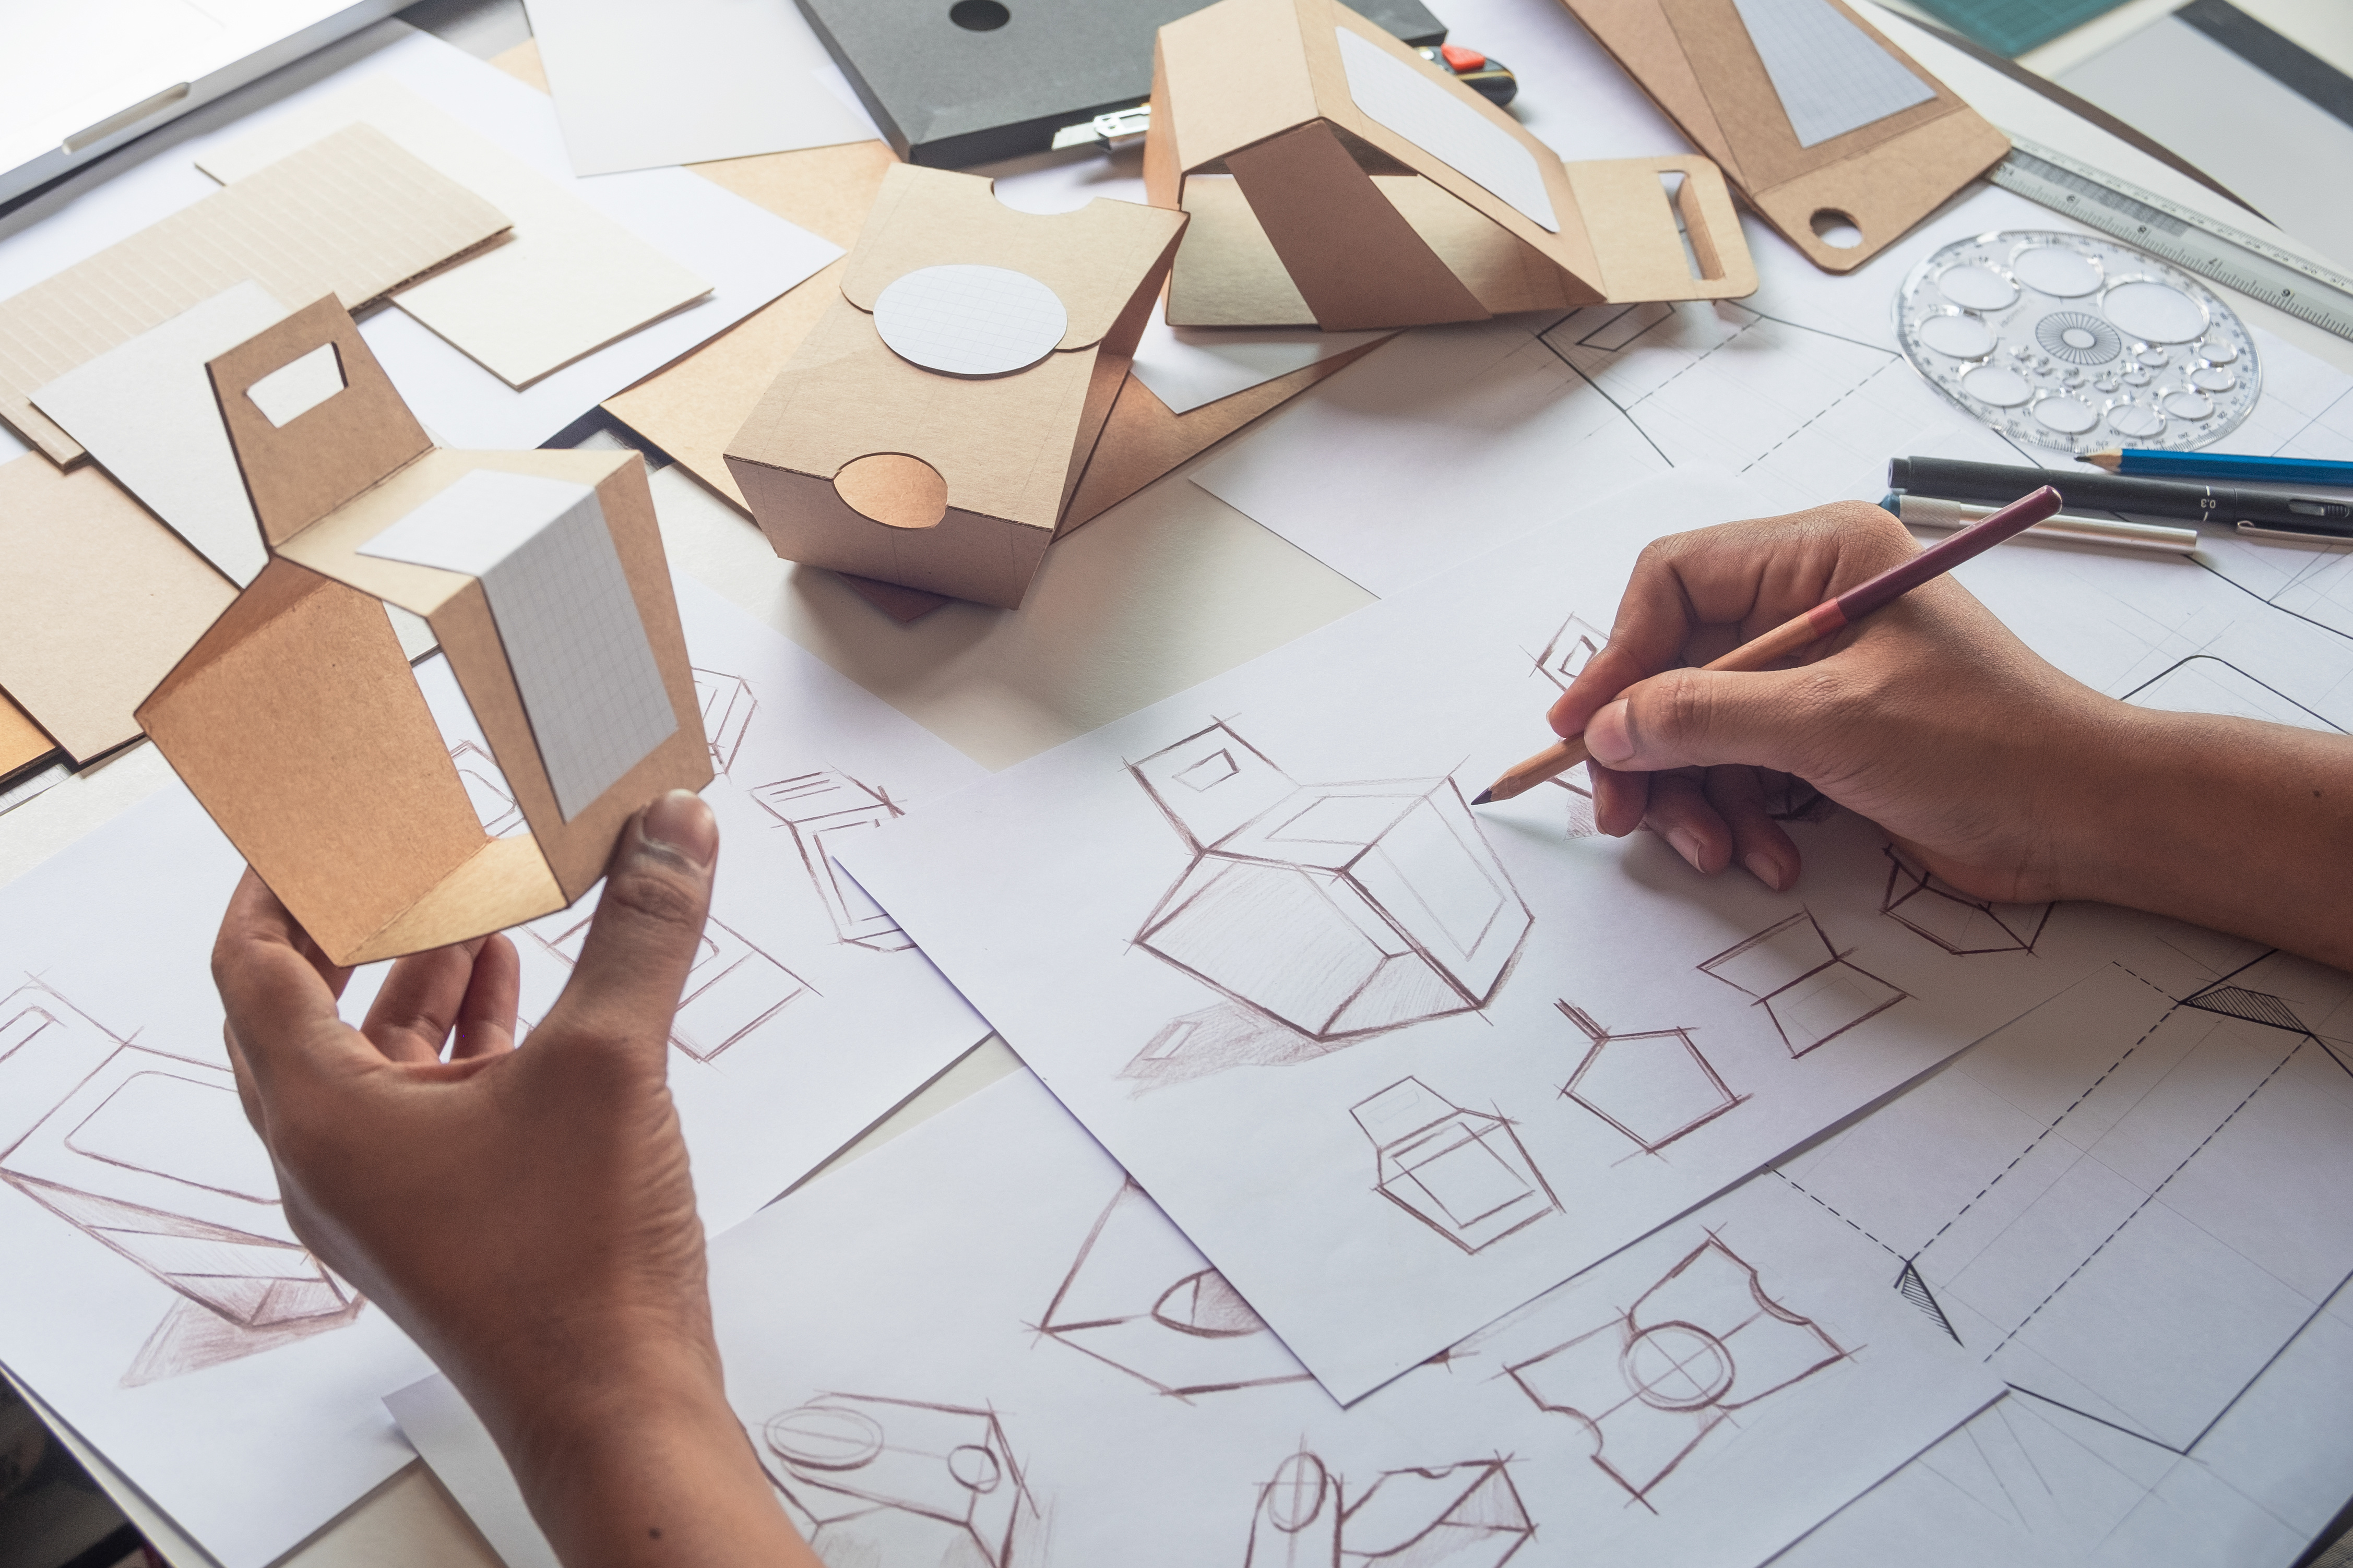 Product designer draws a concept for a new box while holding a working model of the box